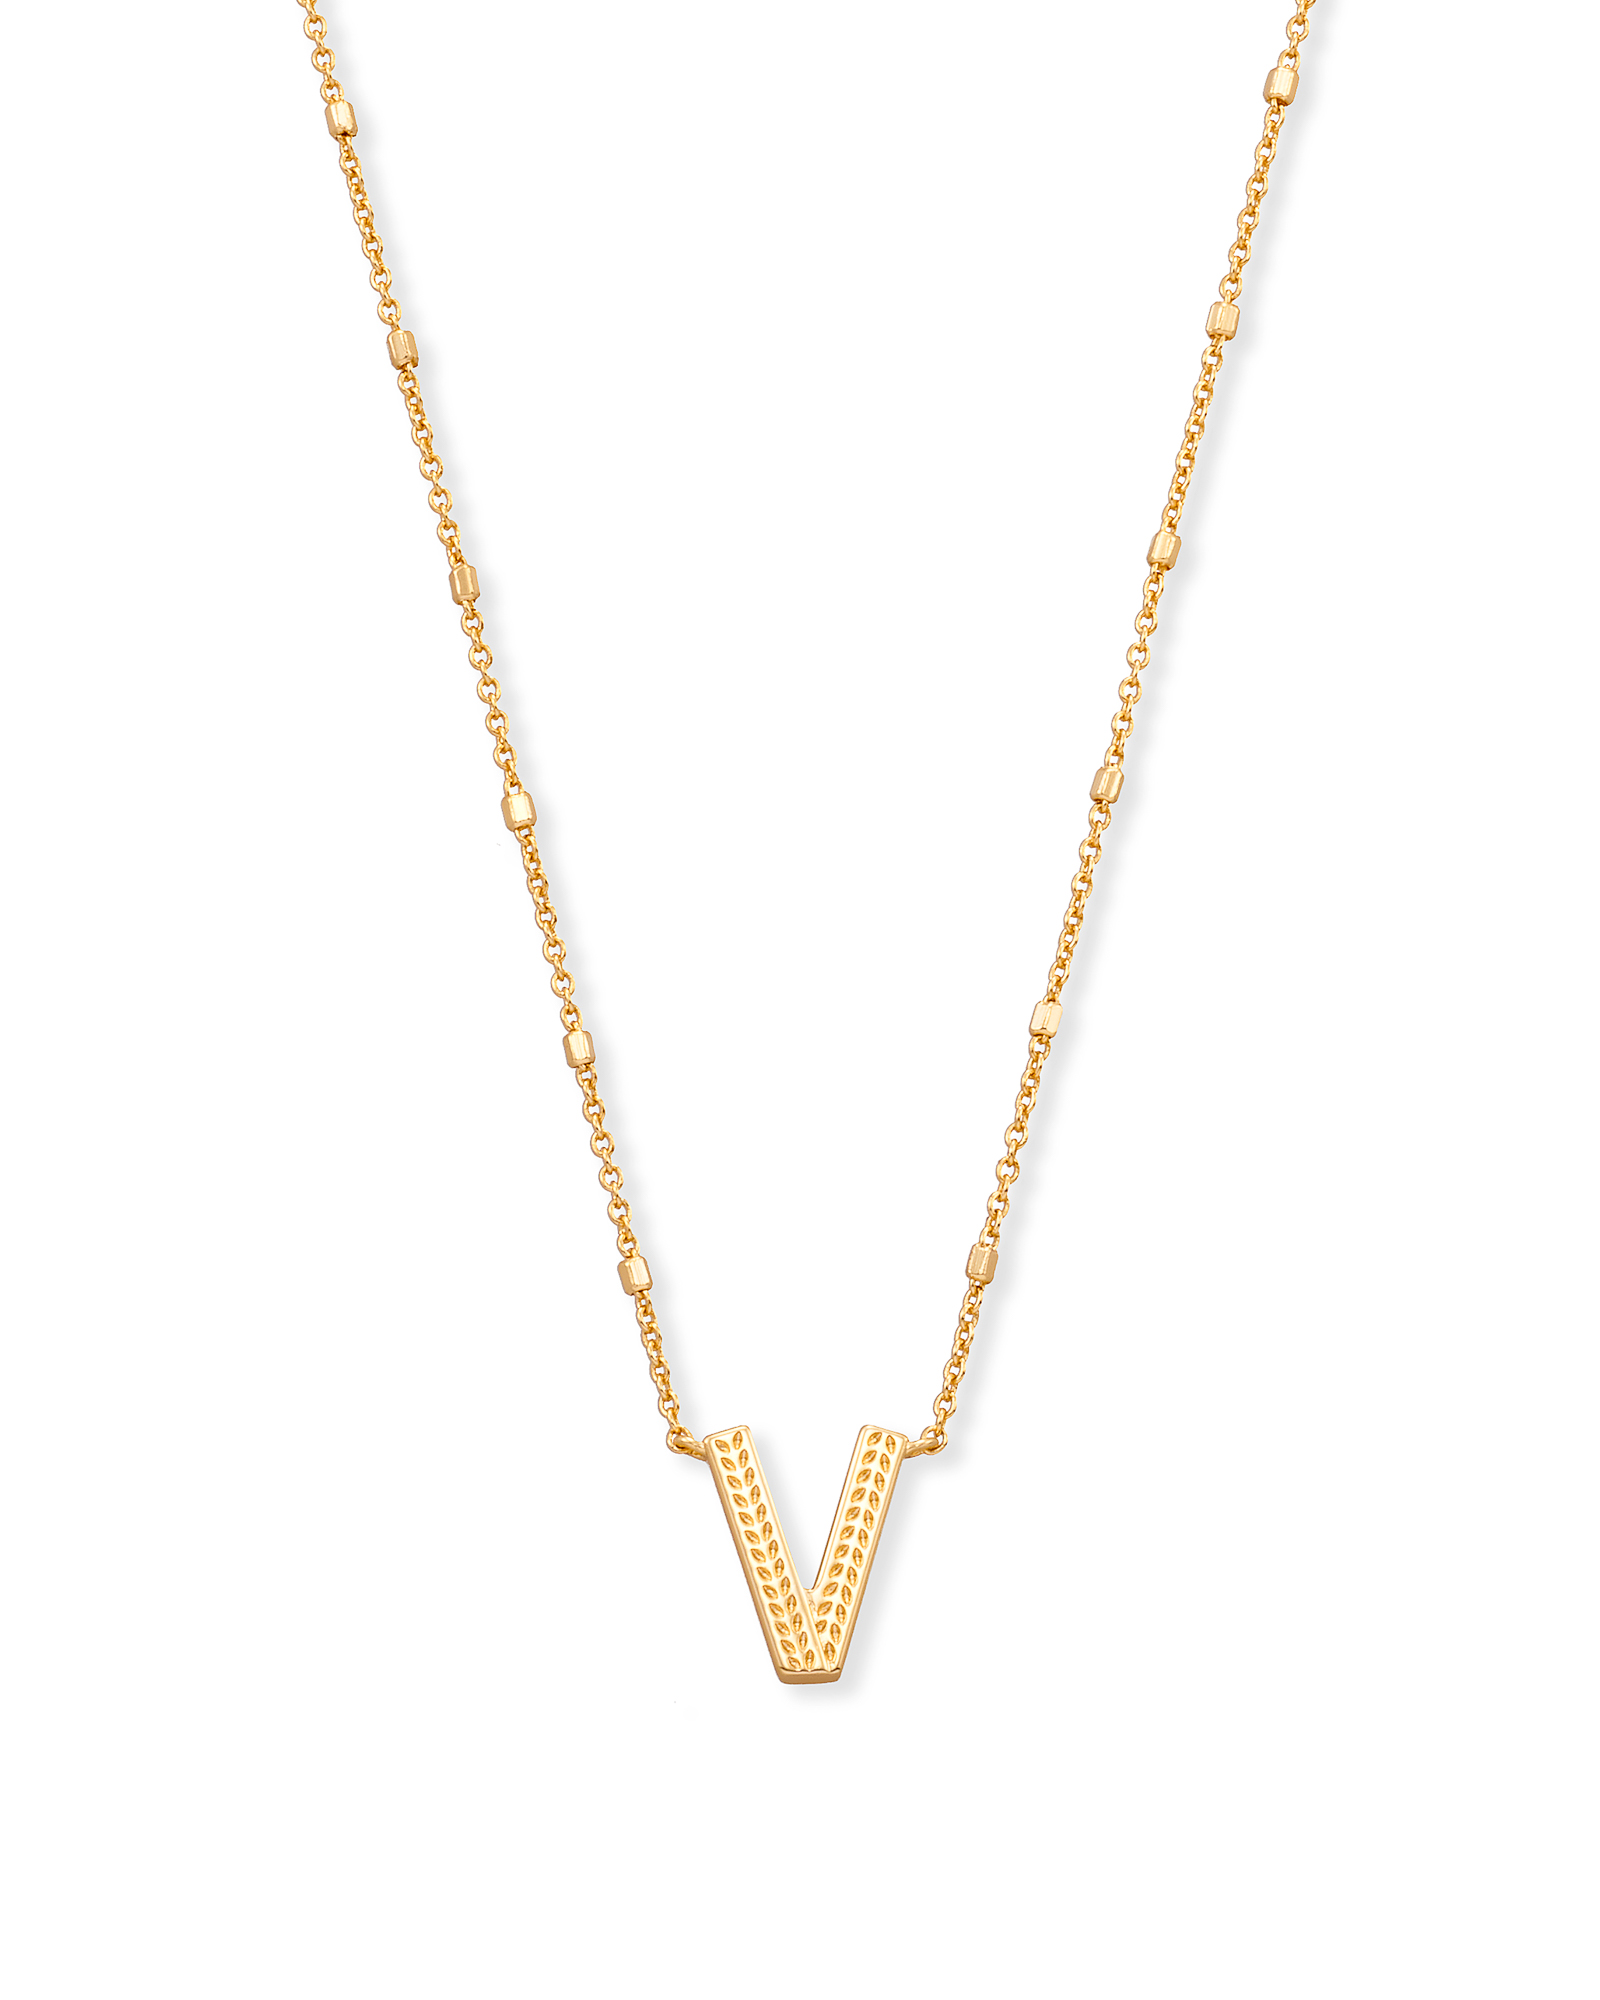 Kendra Scott Letter V Disc Pendant Necklace – Calligraphy Creations In KY